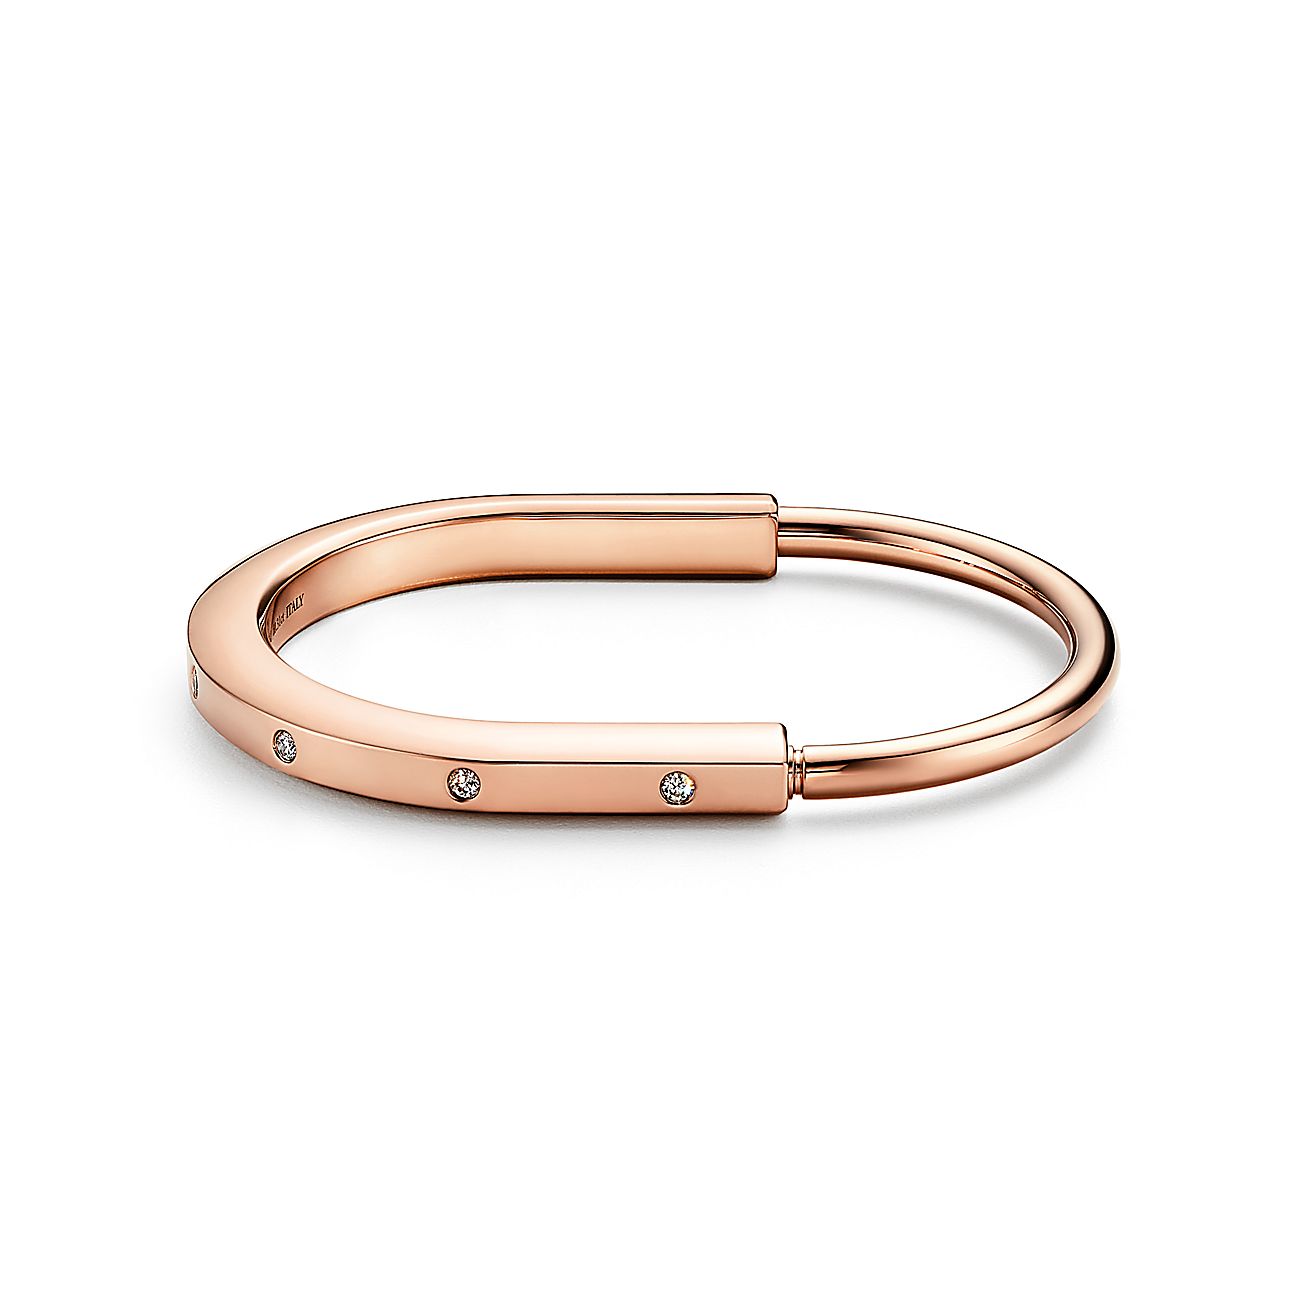 Tiffany Lock Bangle Bracelet in Rose Gold with Diamond Accents, Size: Extra Large |Lock Men's and Women's Bracelet